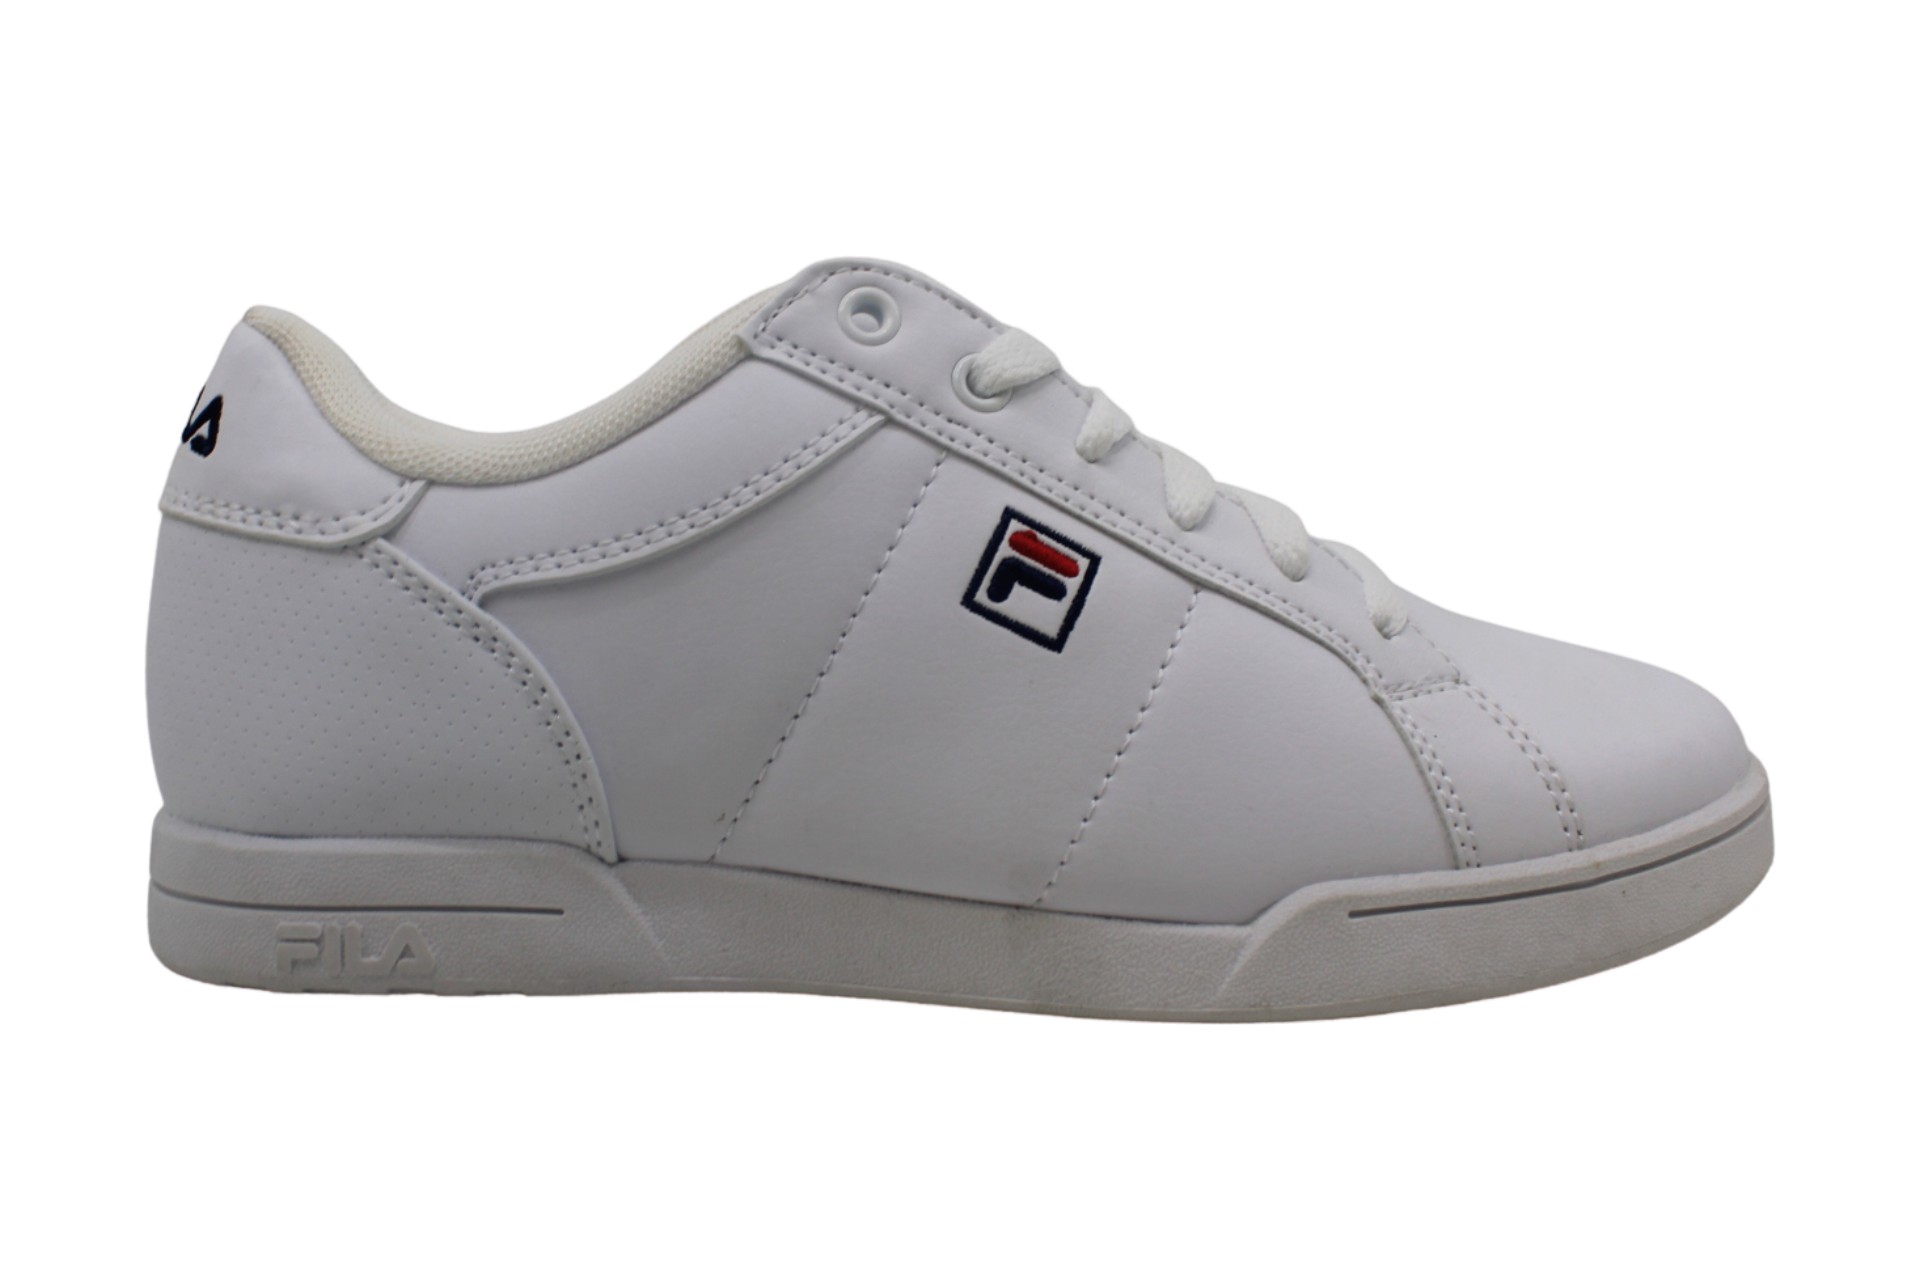 Fila Womens New Campora Low Top Lace Up Walking Shoes, White, Size 8.0 ...